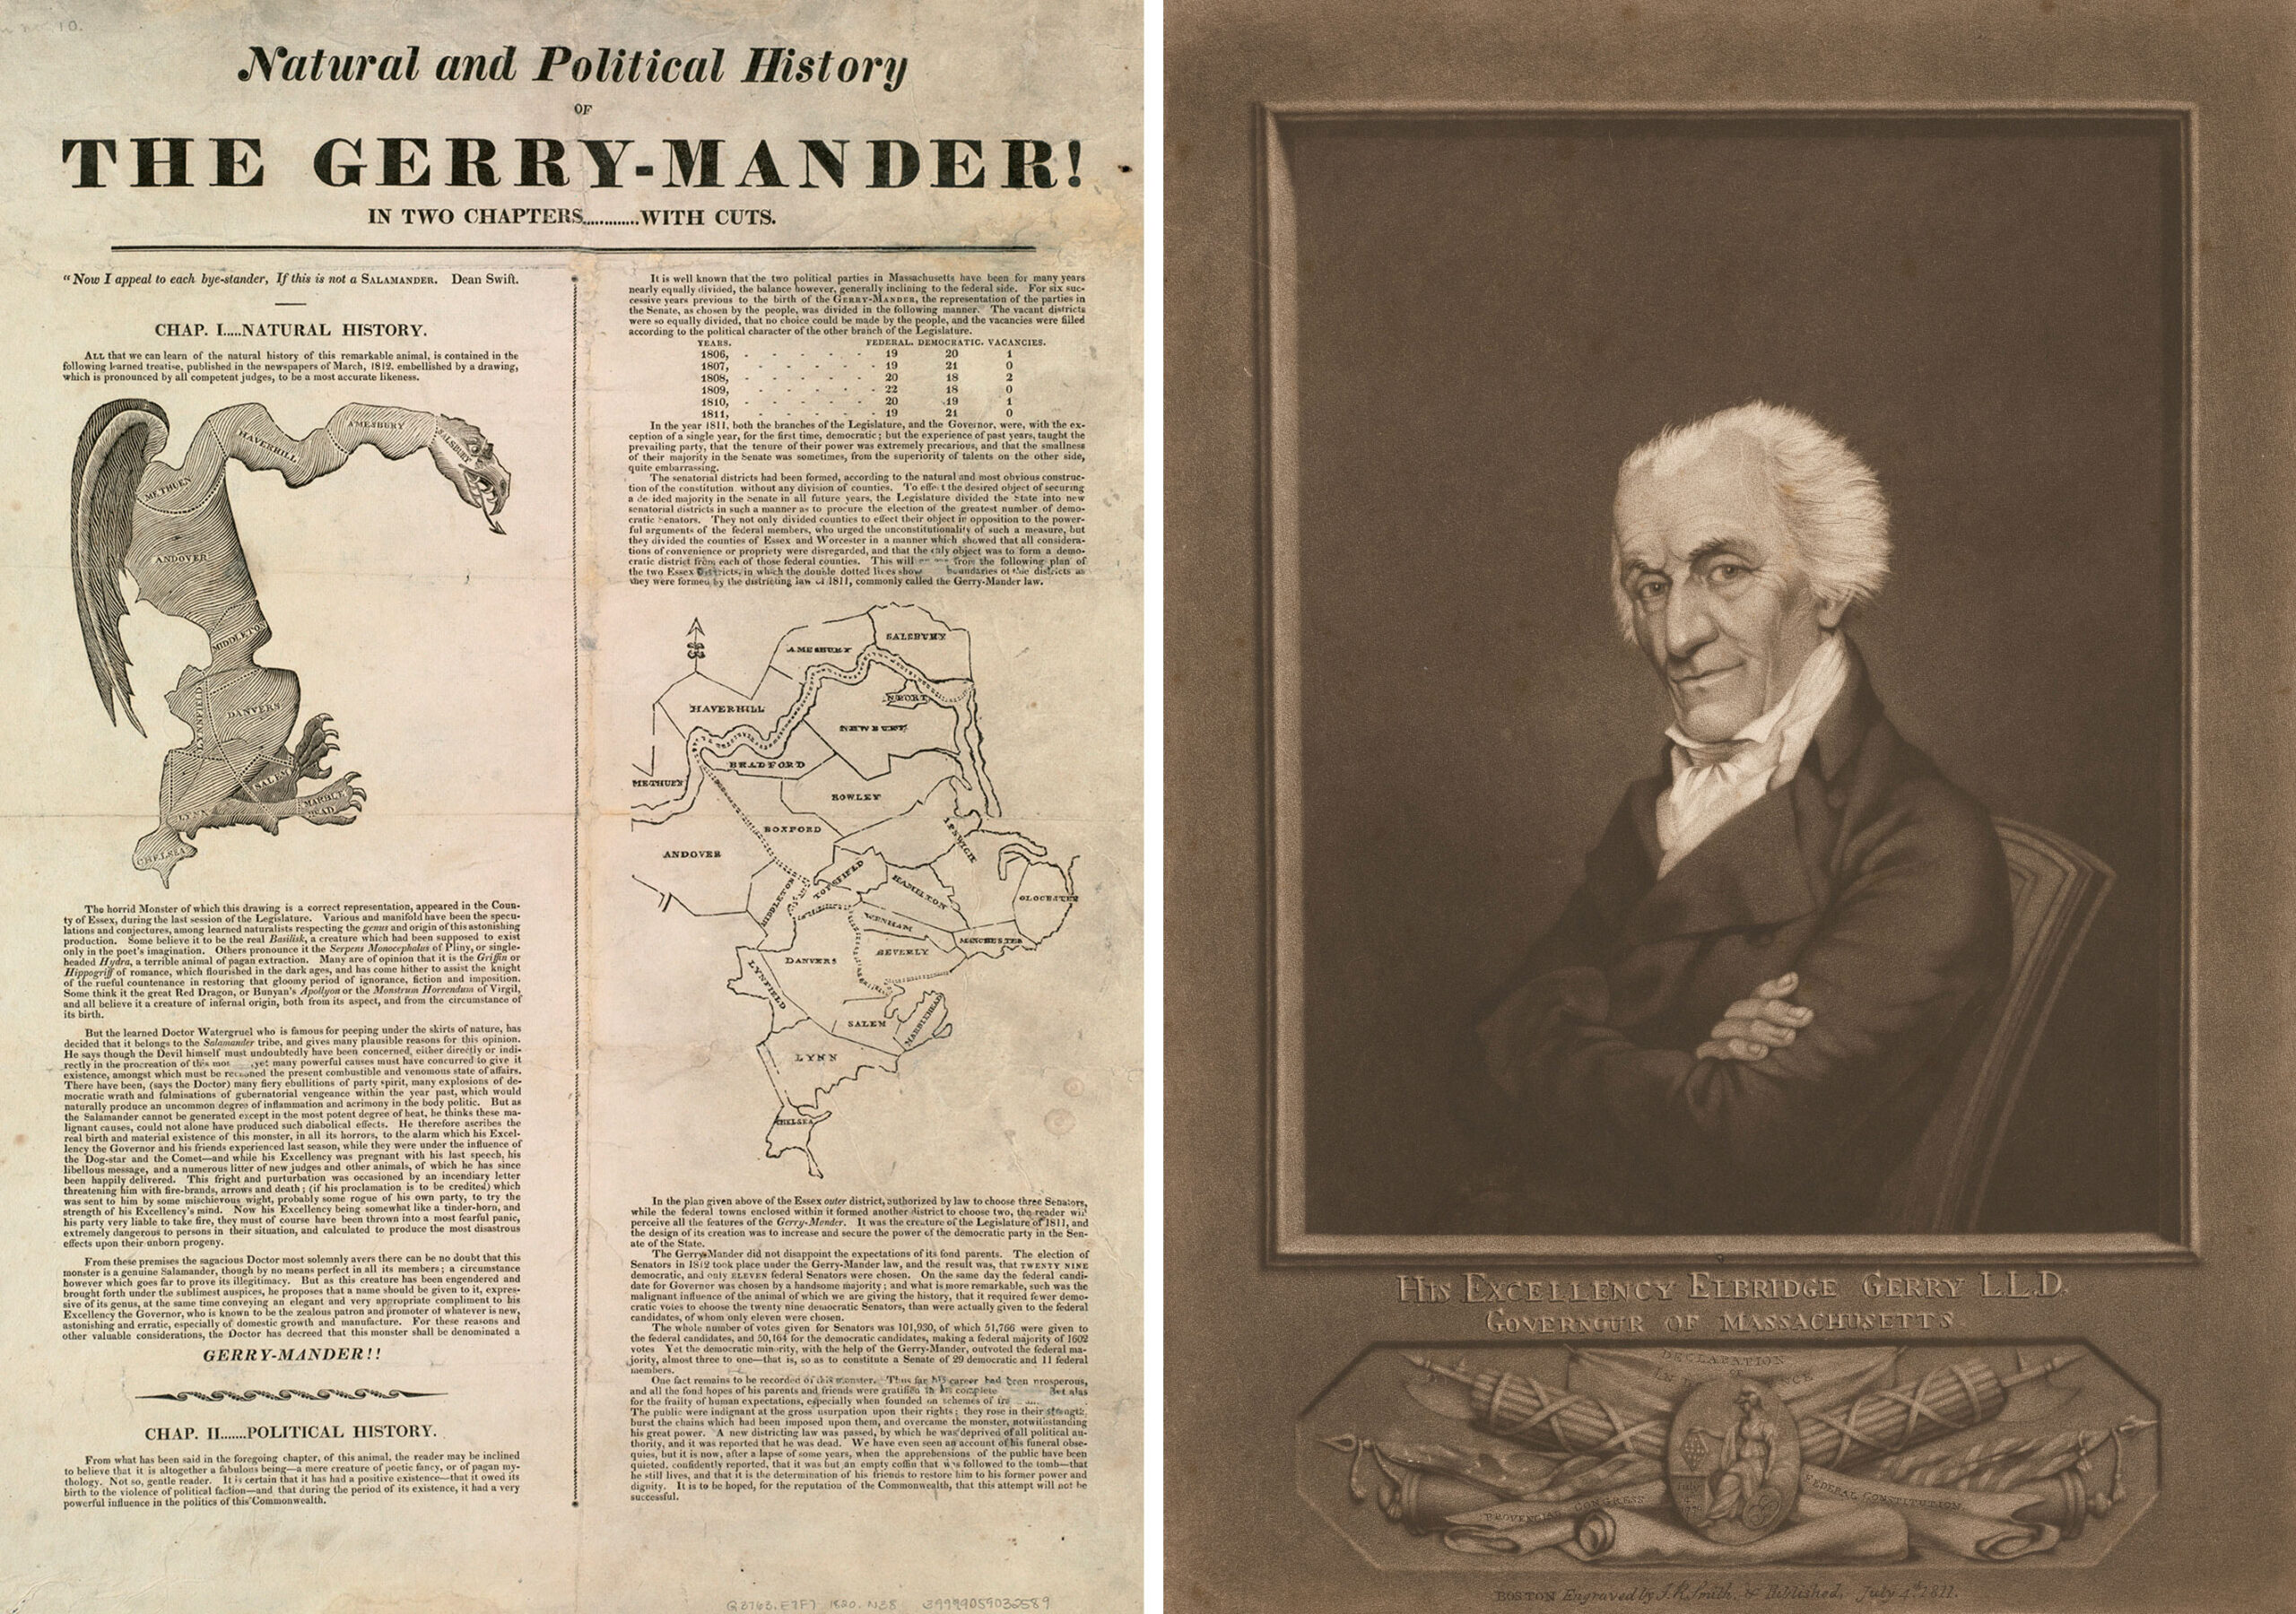 A political broadsidewith text and a salamander cartoon, and an illustration of a man with white hair